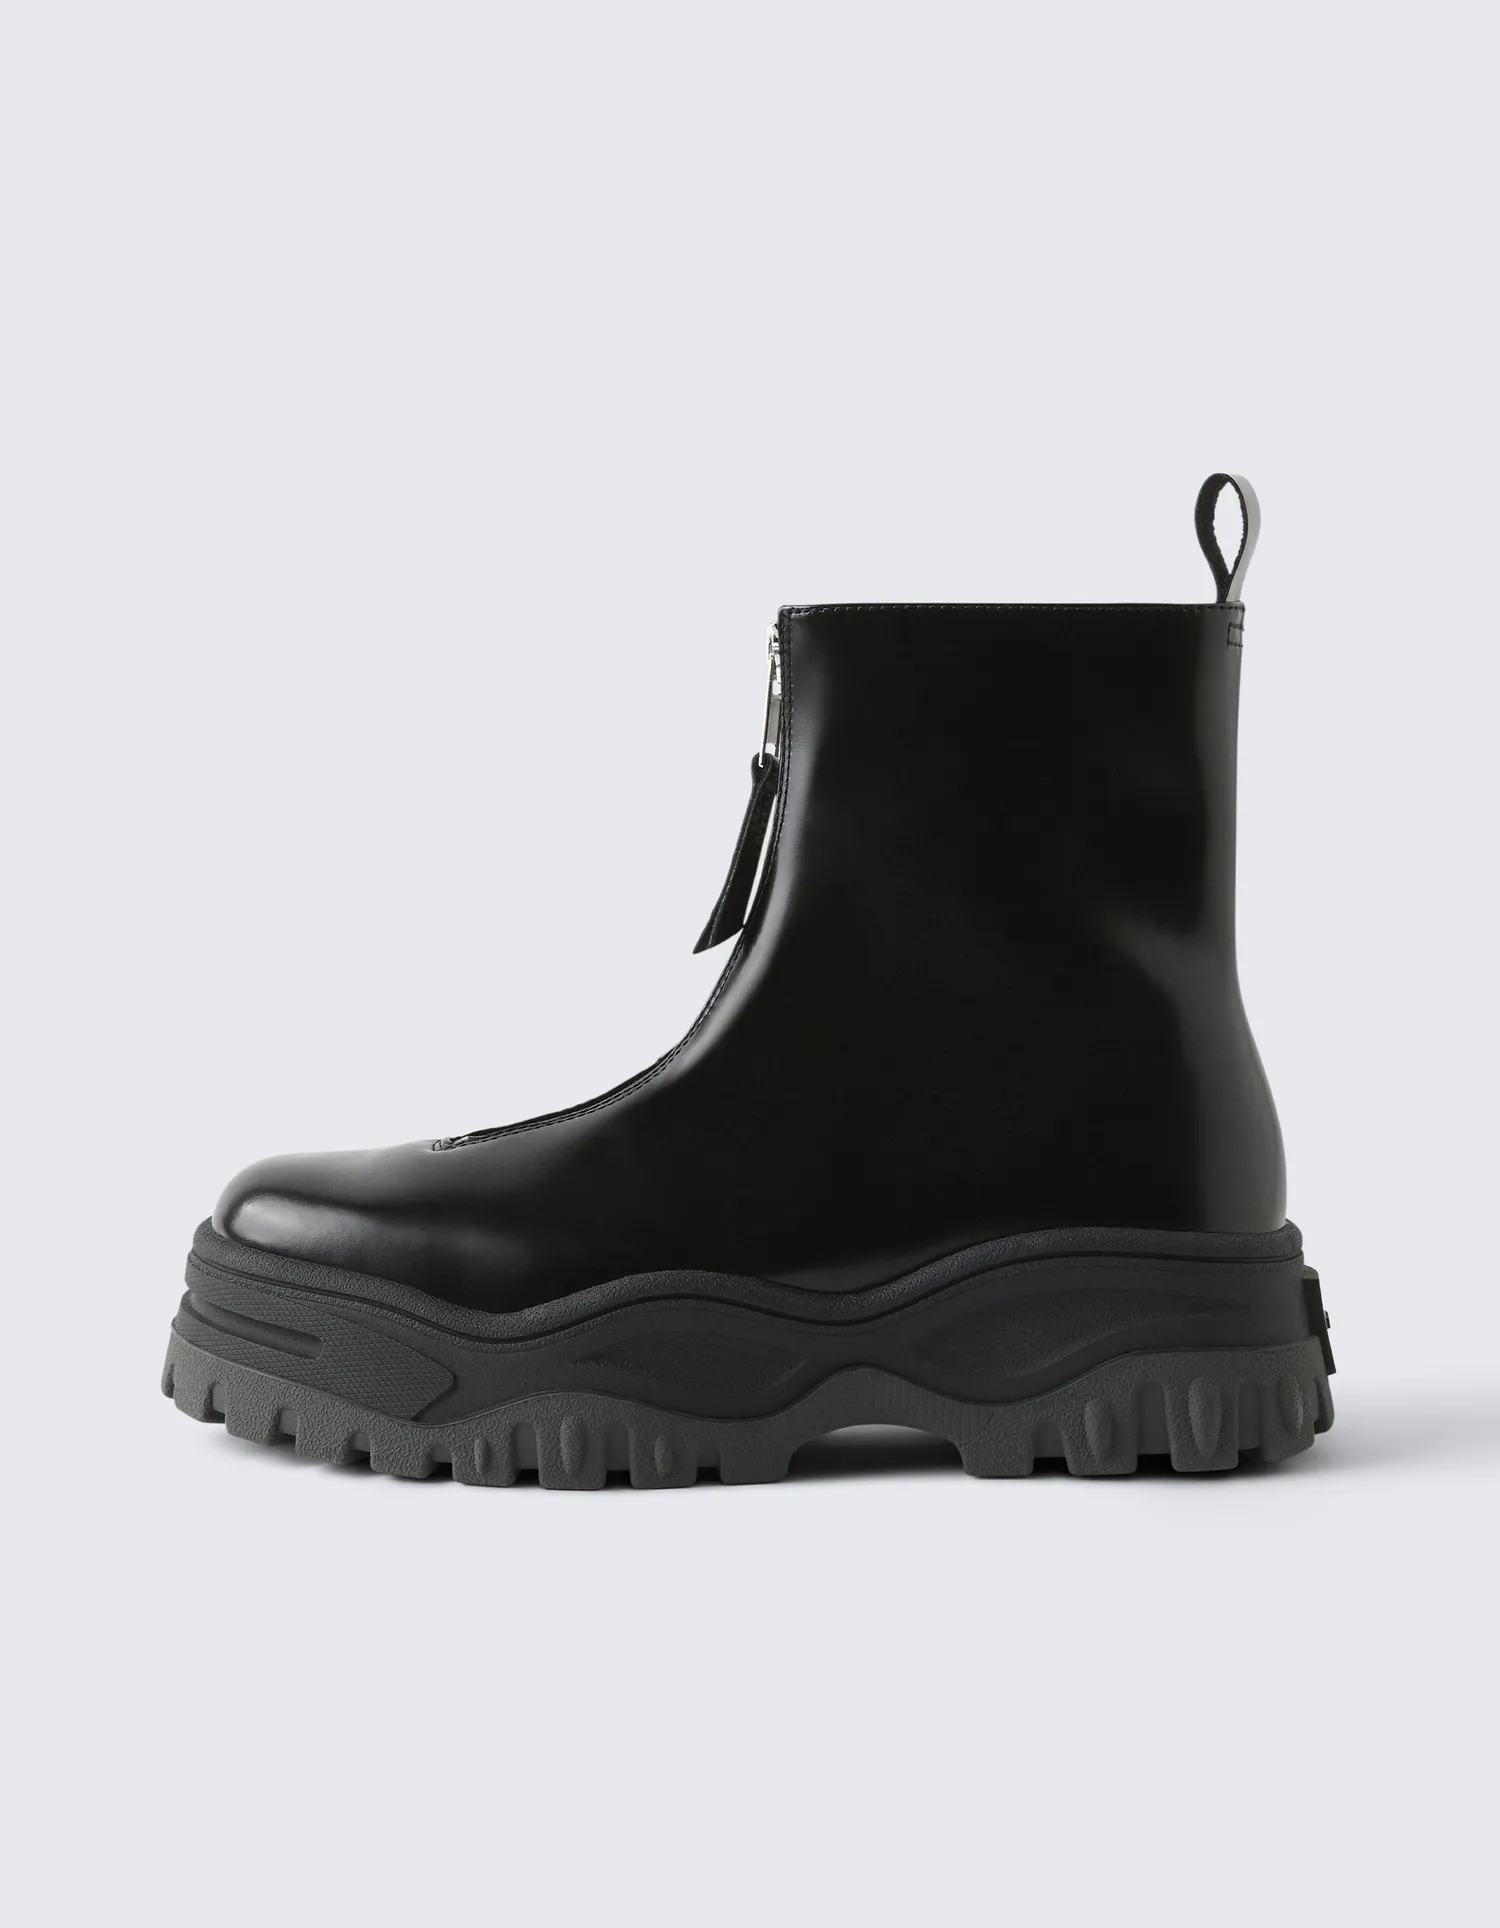 Never Pay Full Price for Eytys Raven Ii Black Boots